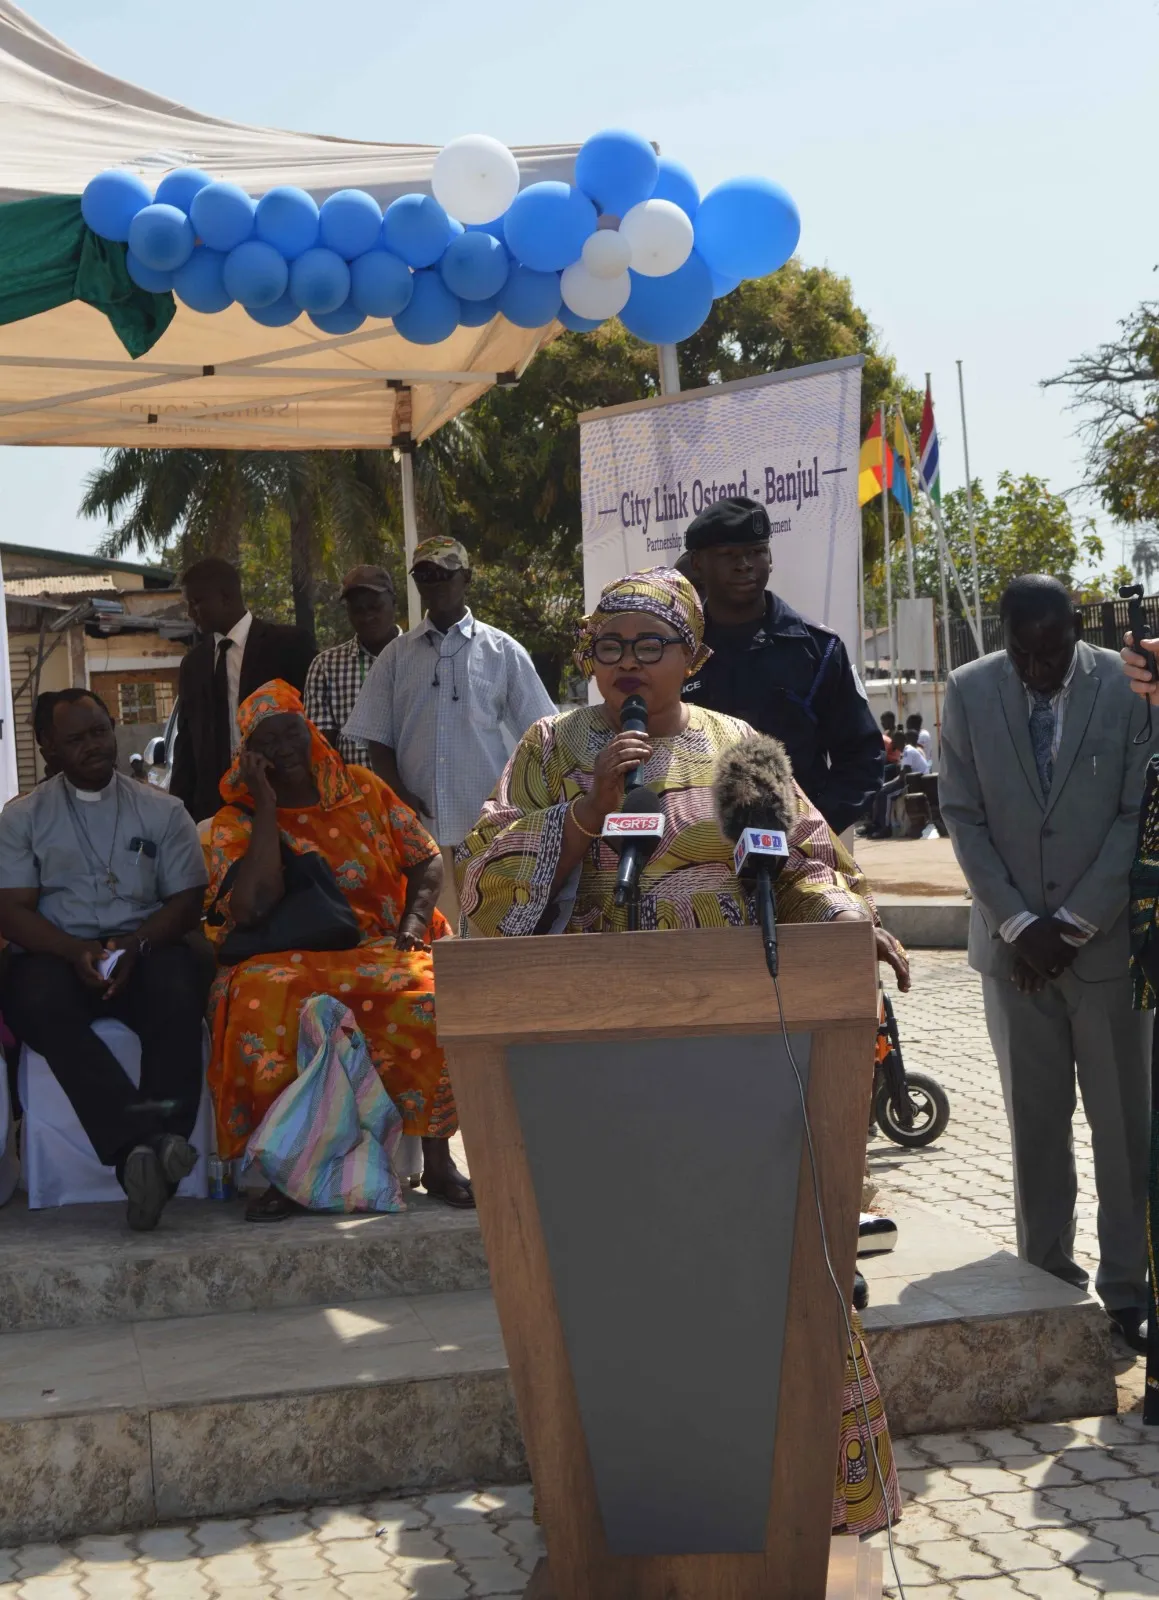 BCC Commemorates 20th Anniversary of City Link Ostend-Banjul Partnership, Unveils New Edifice